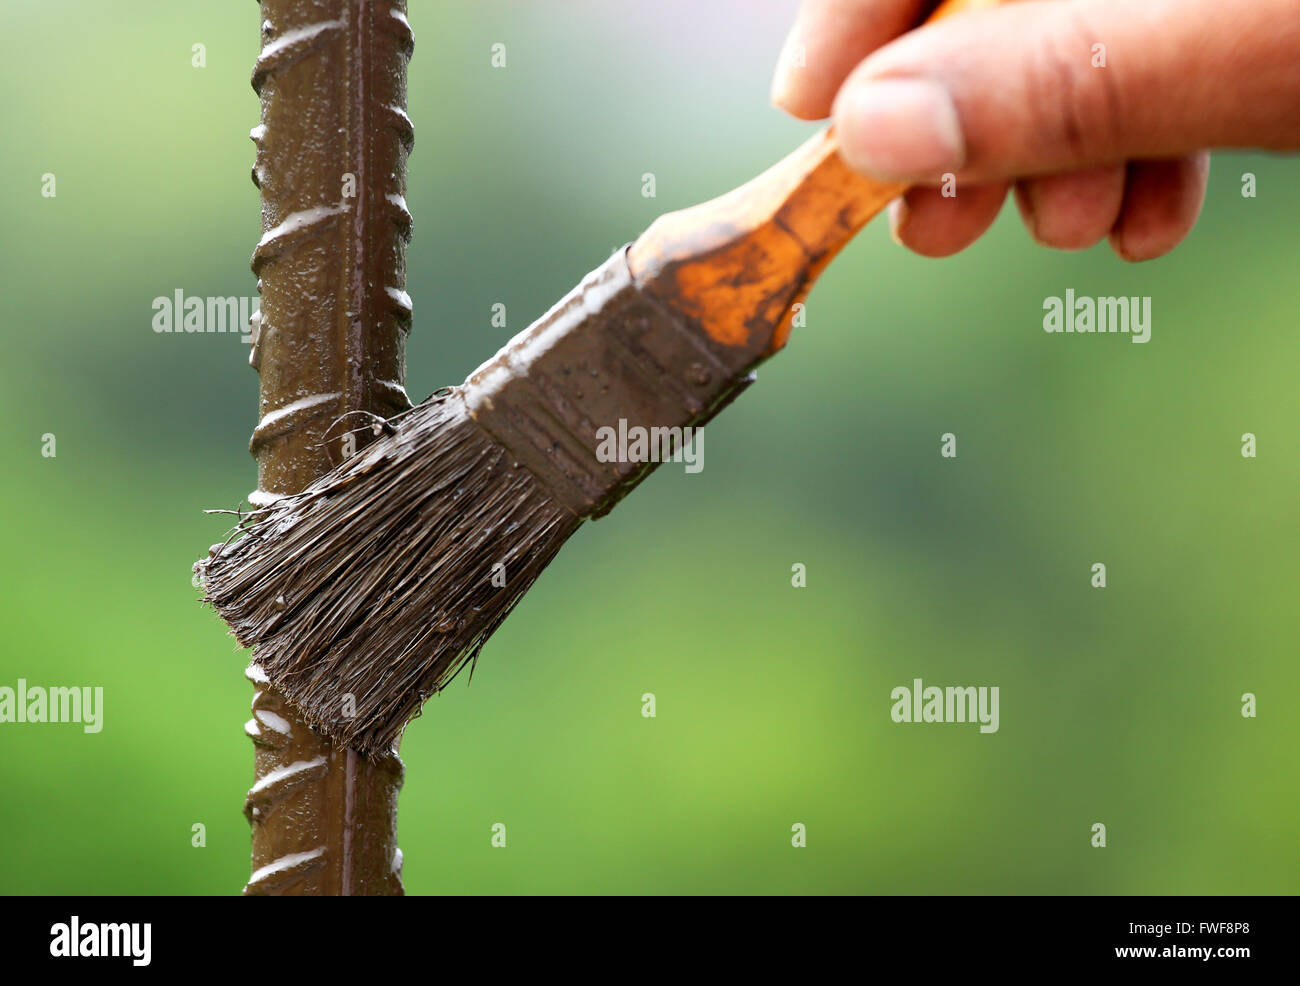 Painting an iron rod with a brush outdoor Stock Photo